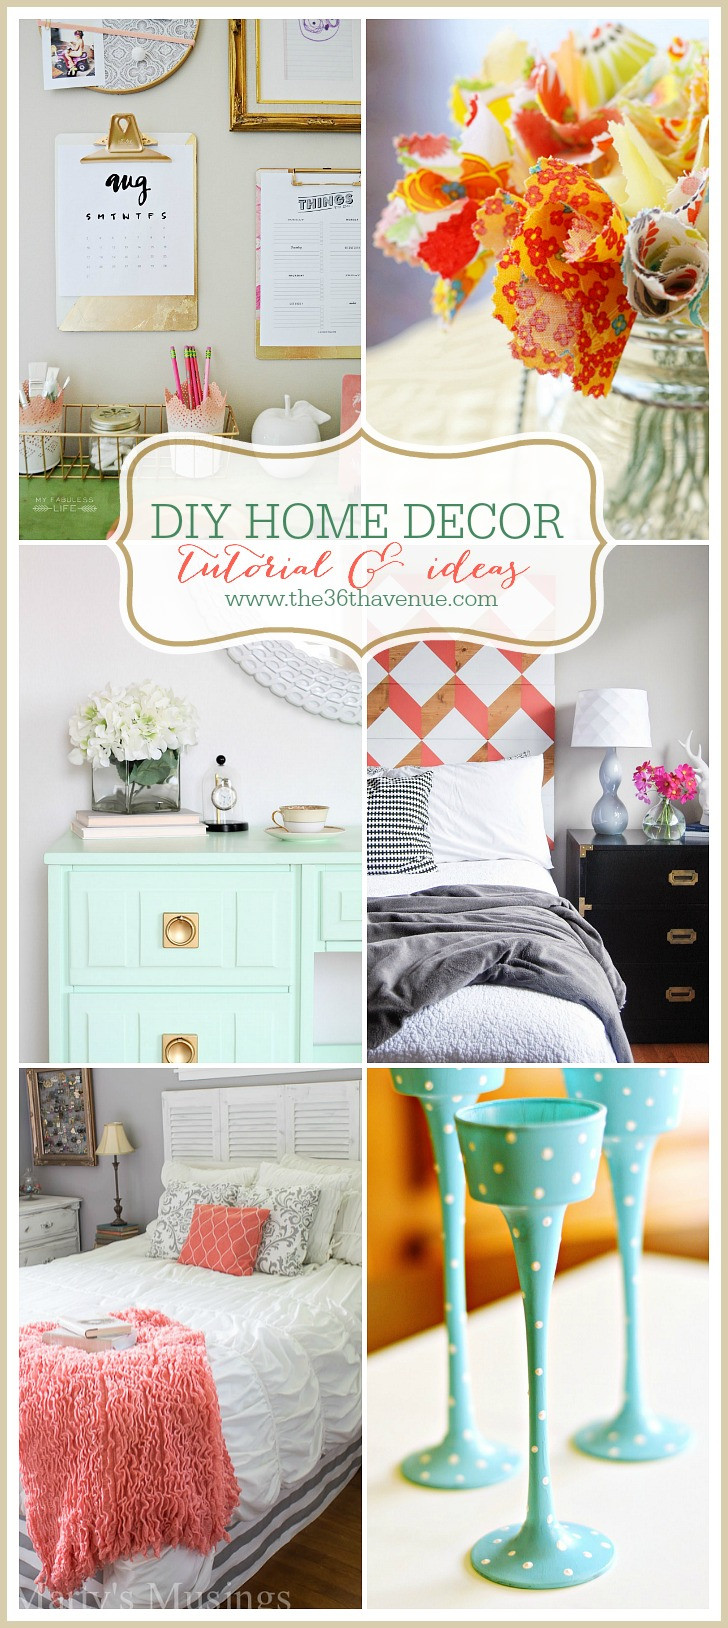 Craft Ideas For Home Decor
 The 36th AVENUE Home Decor DIY Projects